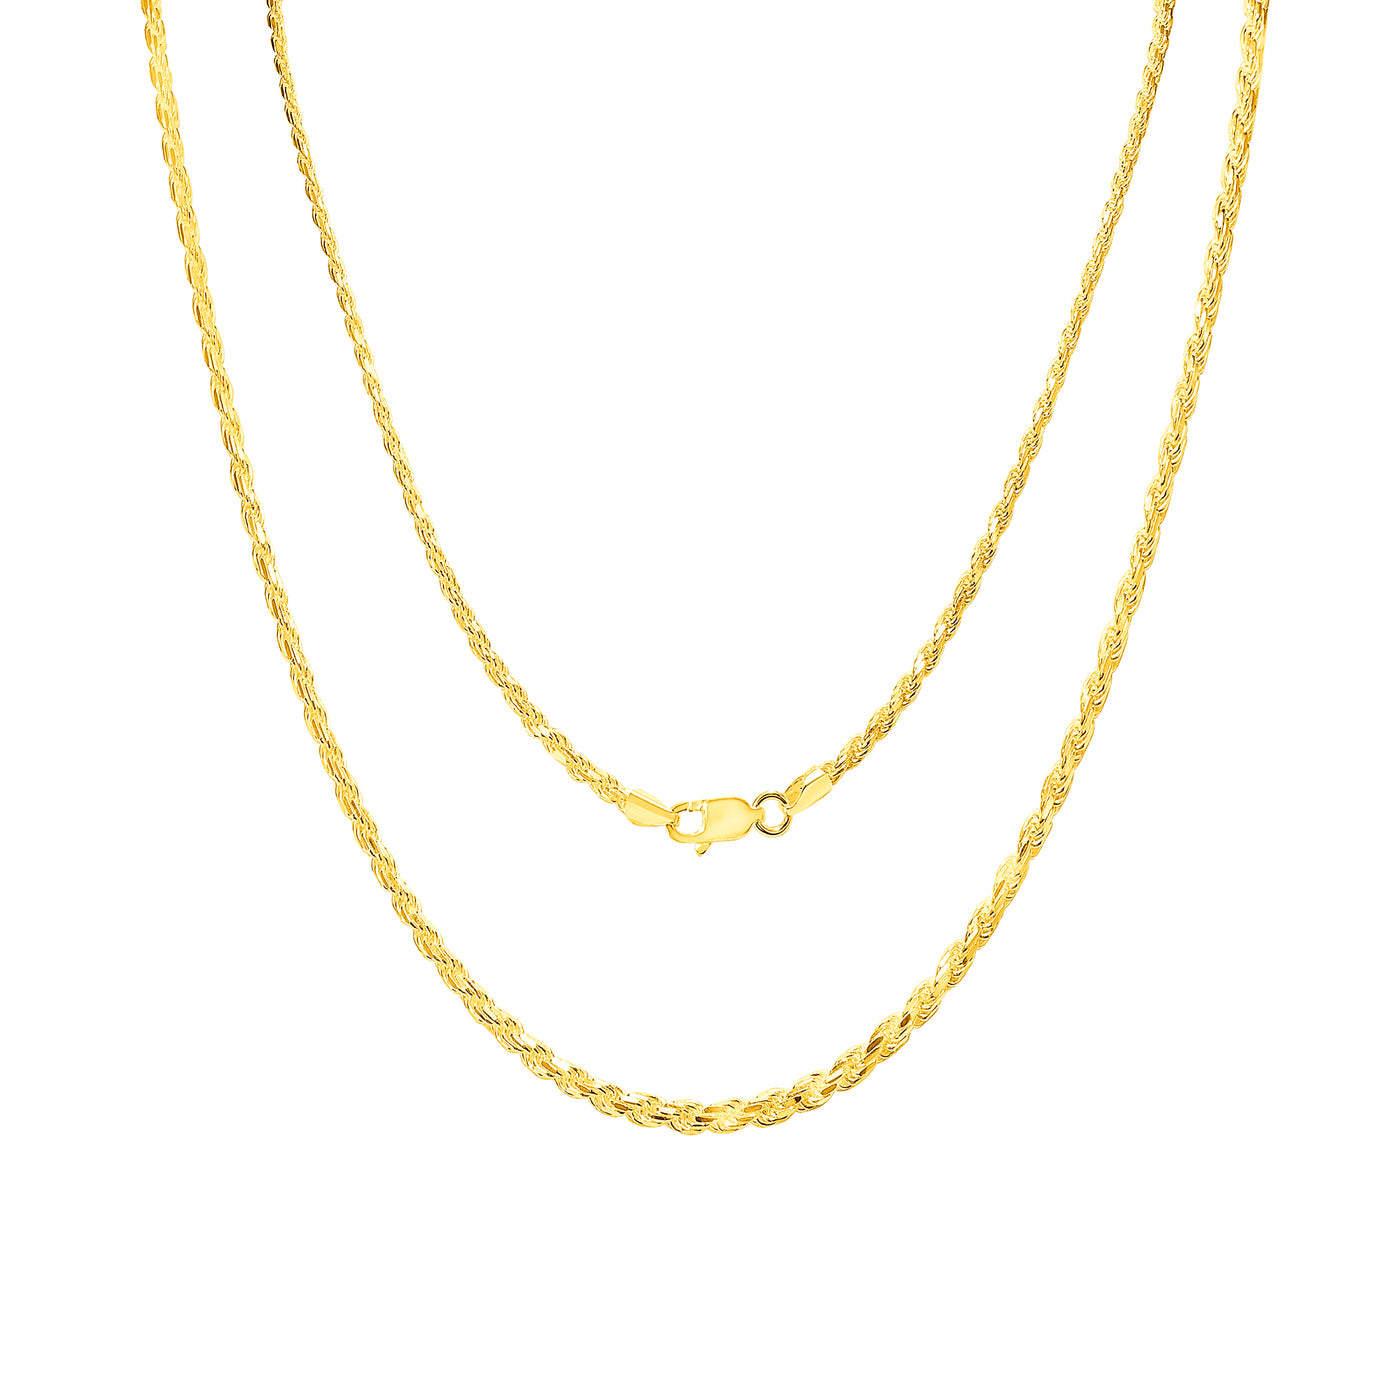 Solid 14K Yellow Gold 2 mm-4 mm Diamond-Cut Rope Chain Necklace 16"-26"